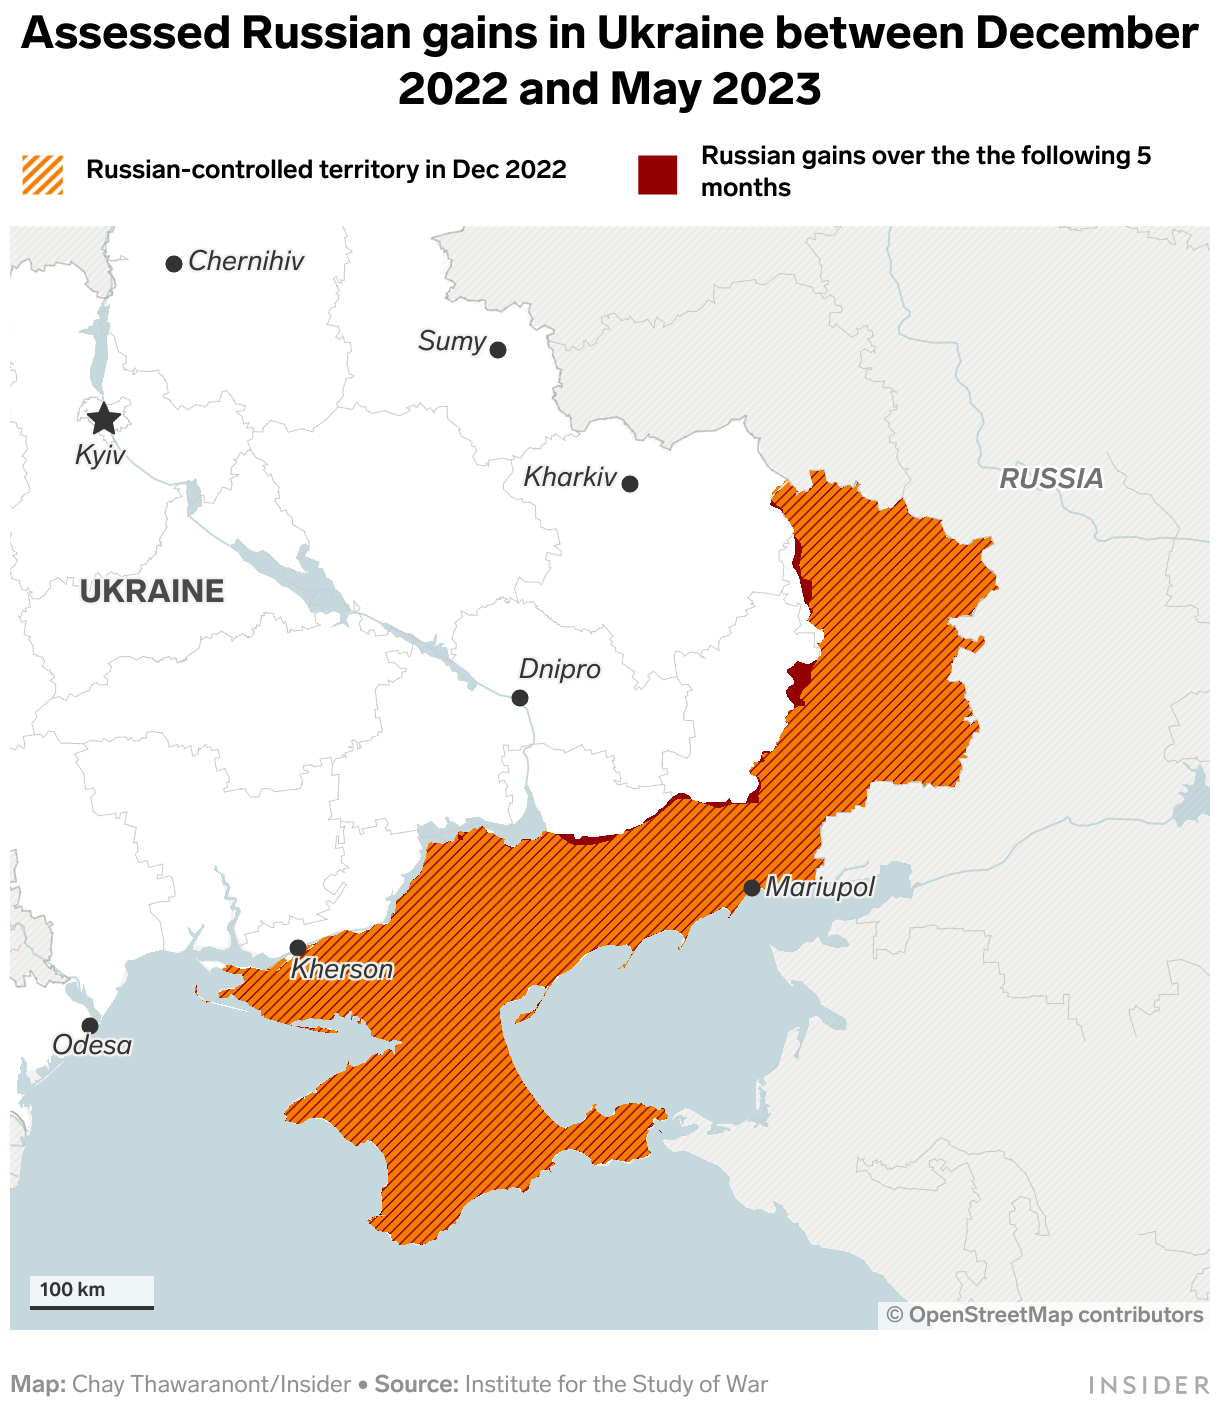 A map of Ukraine where the Russian controlled territory is highlighted.